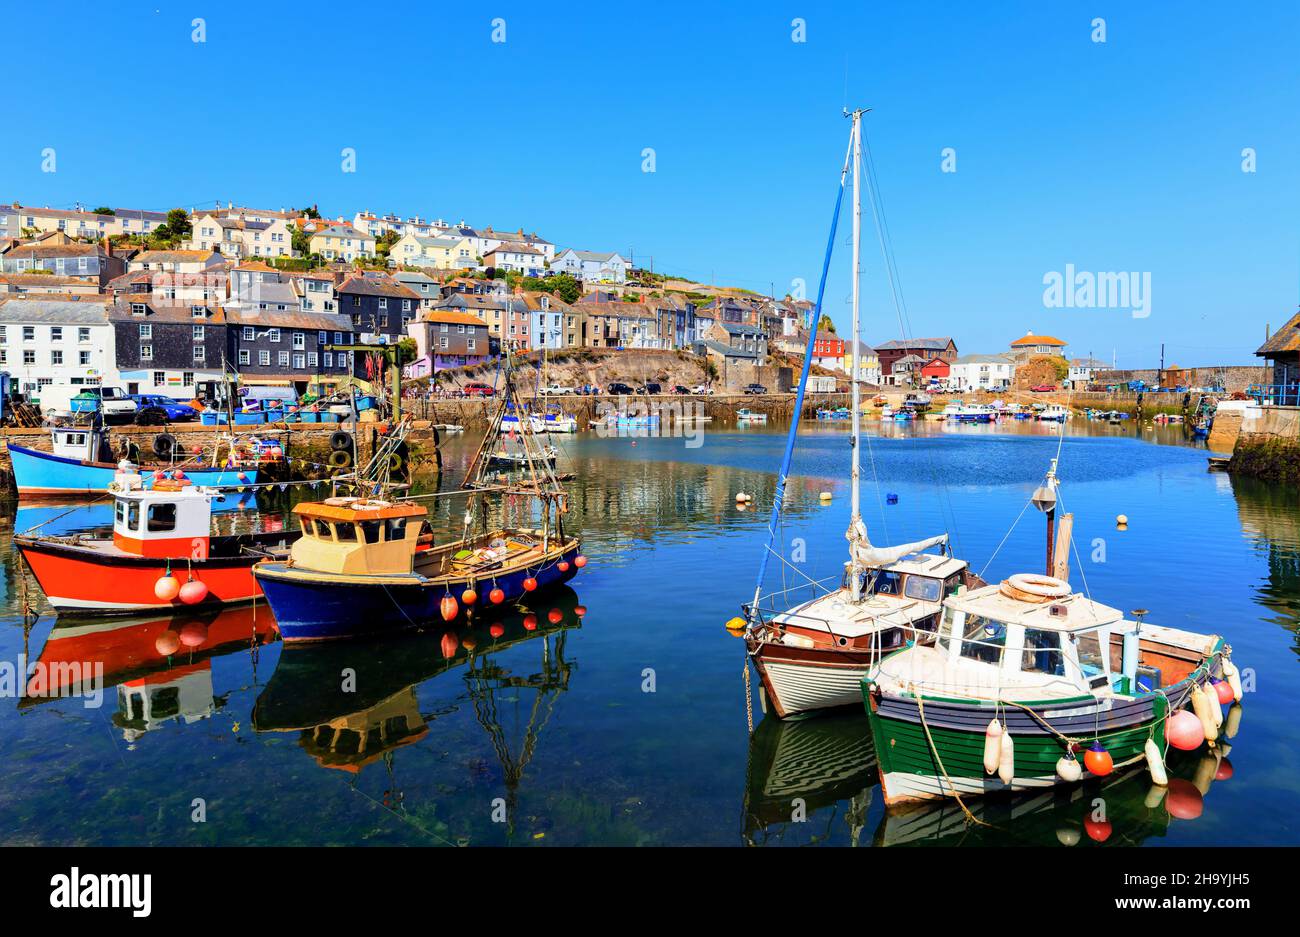 Mevagissey Cornwall fishing boats in harbour colourful English coast scene Stock Photo